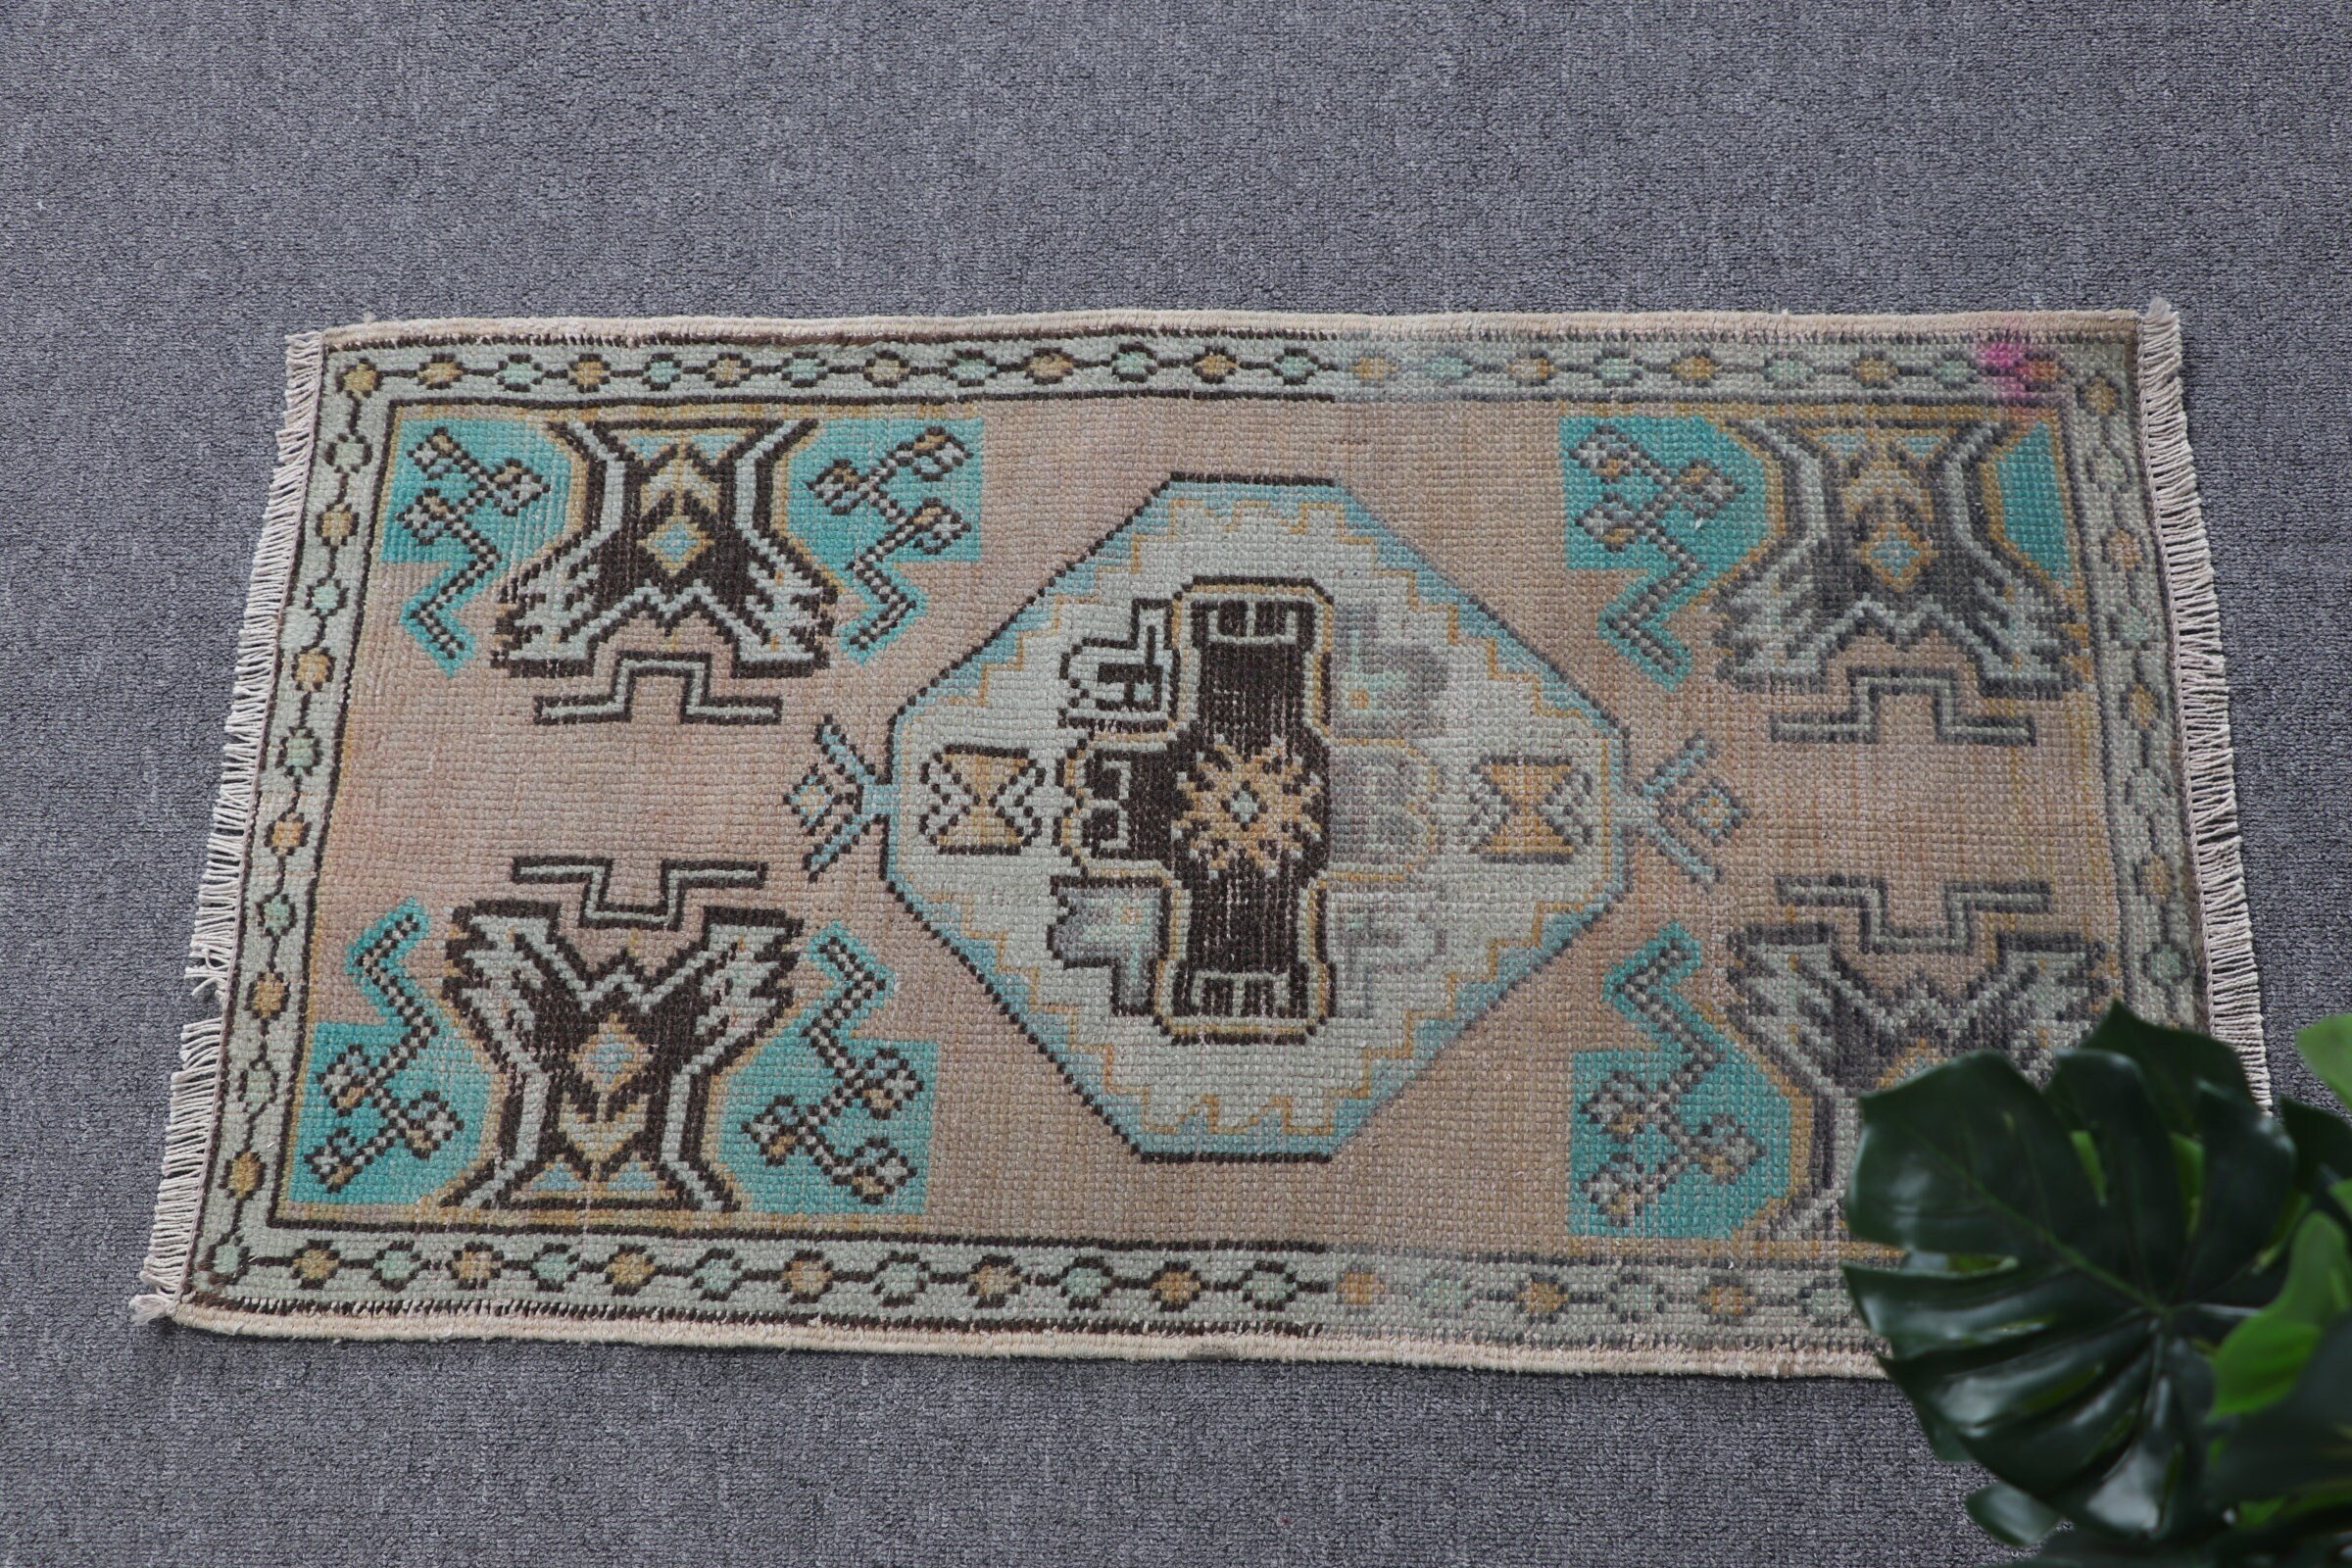 Wall Hanging Rug, Vintage Rug, Kitchen Rugs, Home Decor Rug, Moroccan Rugs, Turkish Rugs, Bronze  1.5x2.7 ft Small Rug